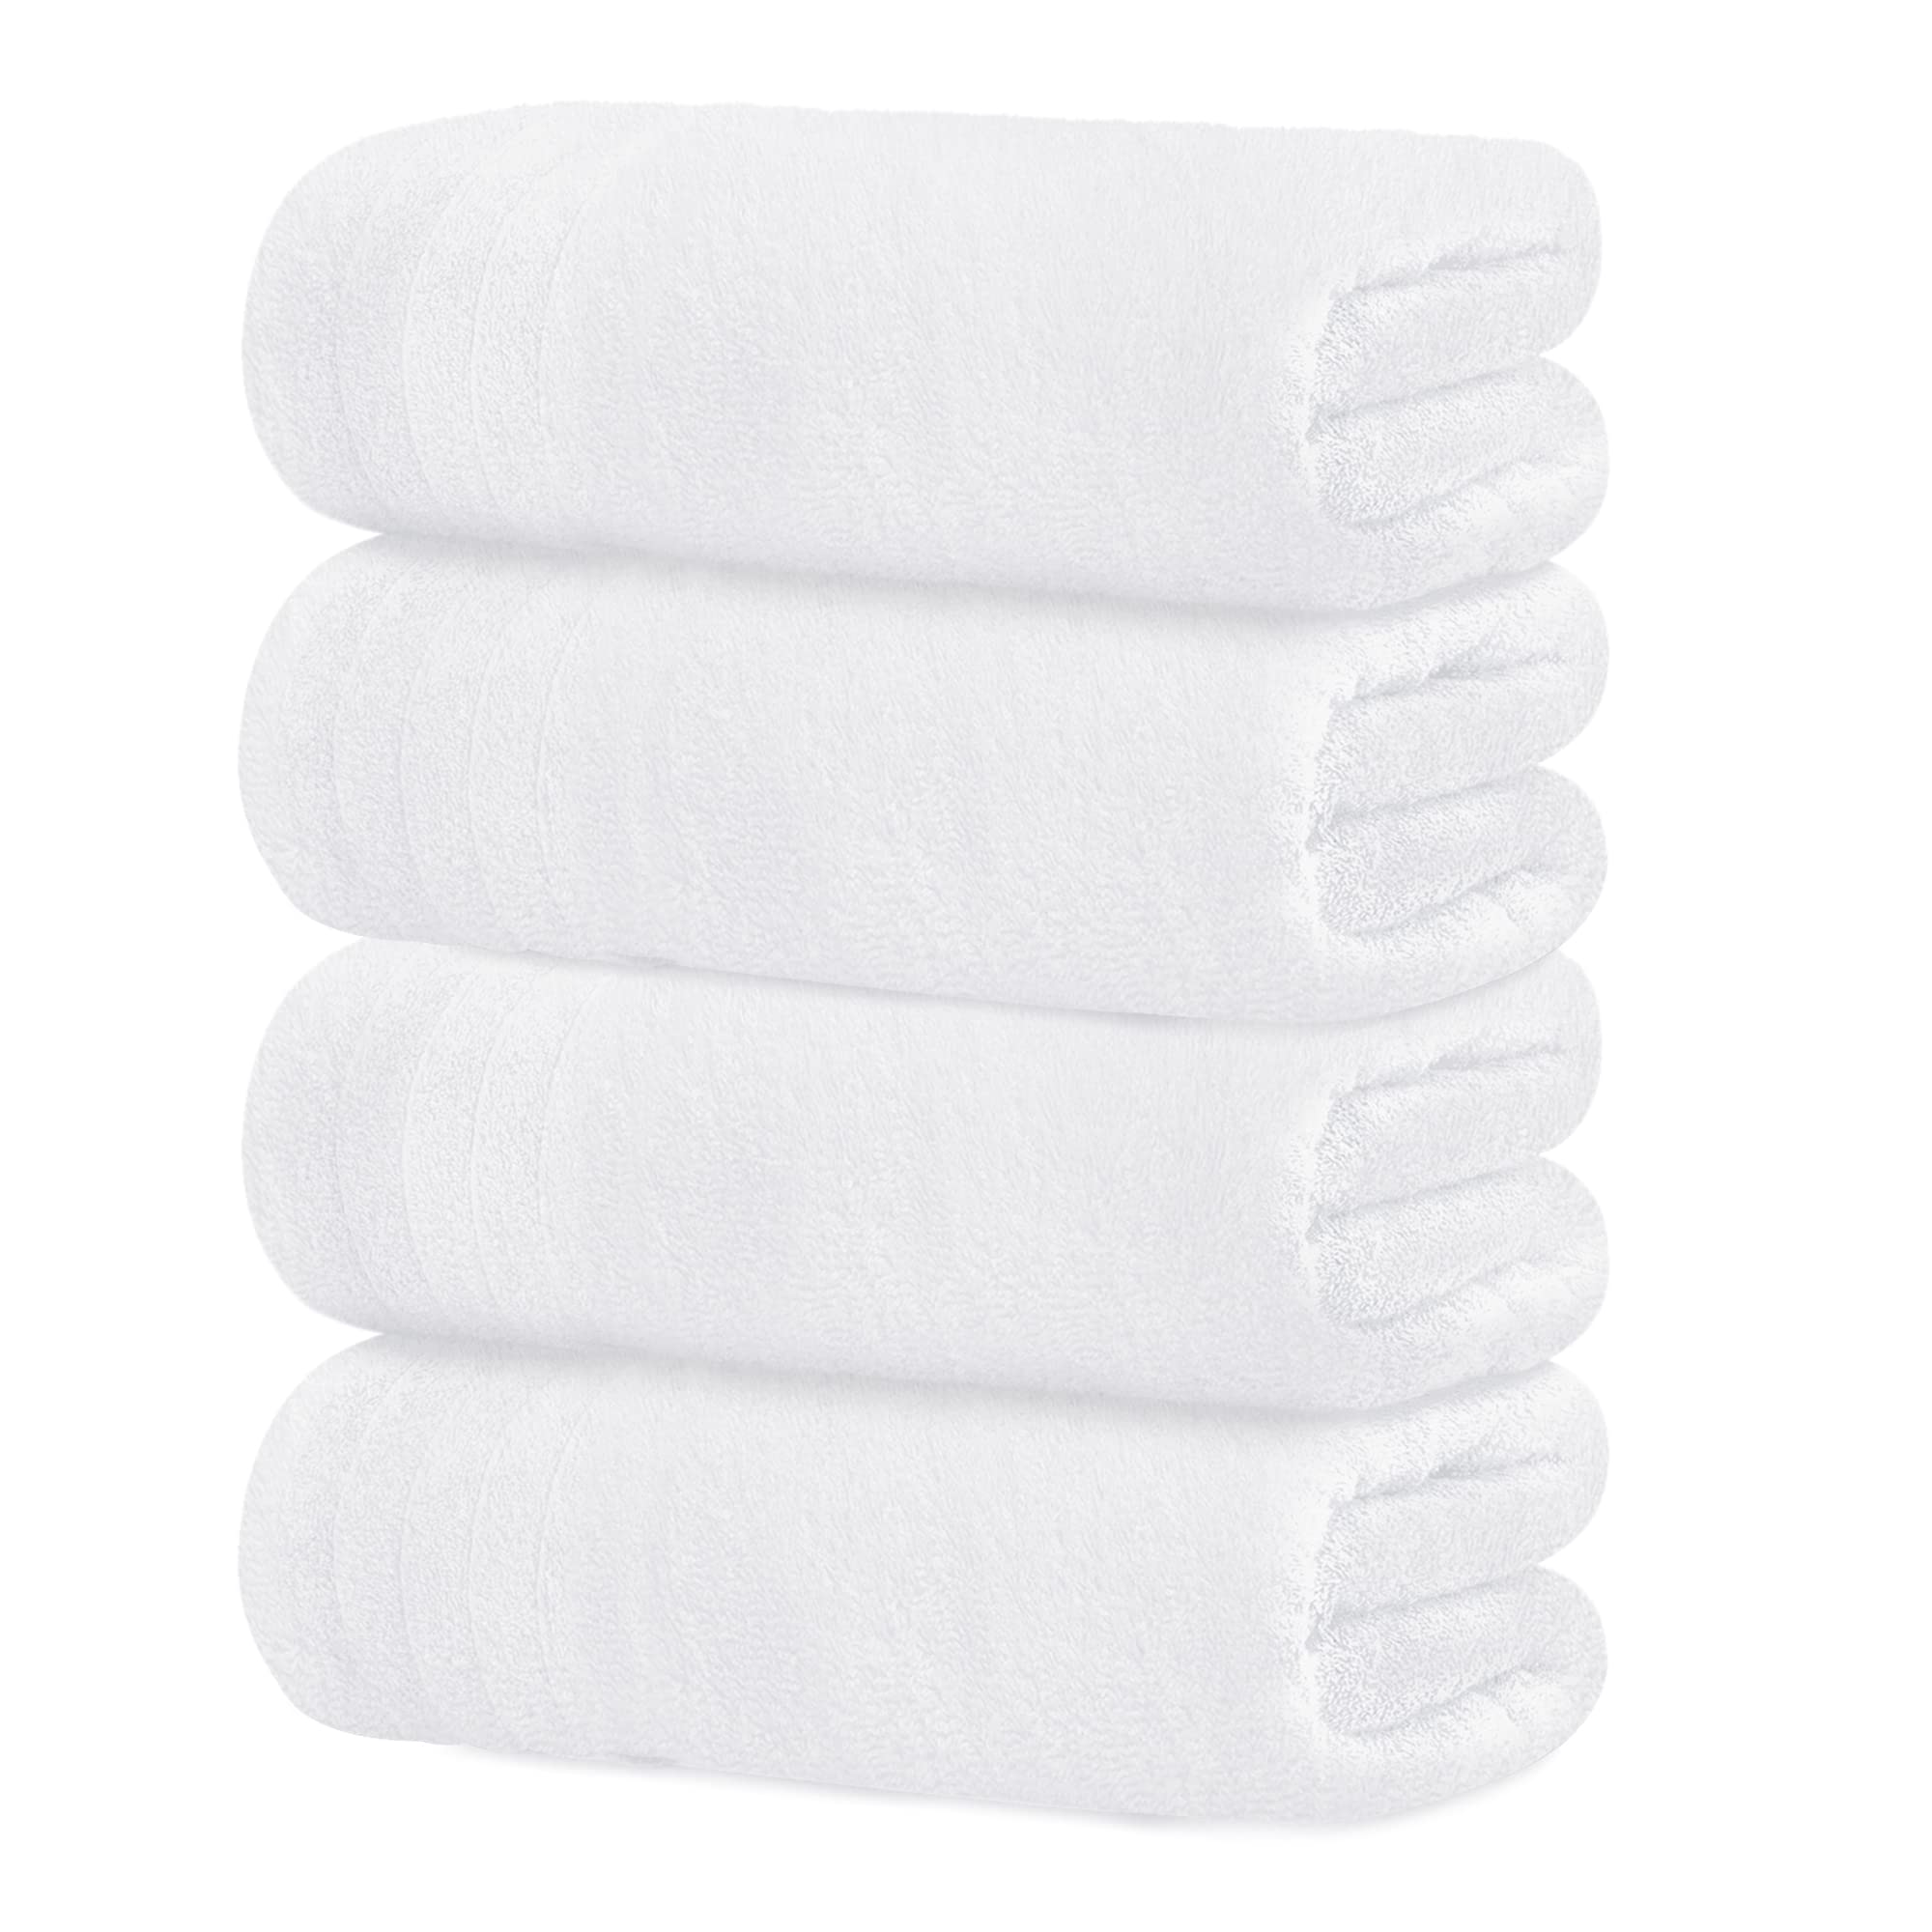 Tens Towels Large Bath Towels, 100% Cotton Towels, 30 x 60 Inches, Extra  Large Bath Towels, Lighter Weight & Super Absorbent, Quick Dry, Perfect Bathroom  Towels for Daily Use 4PK BATH TOWELS